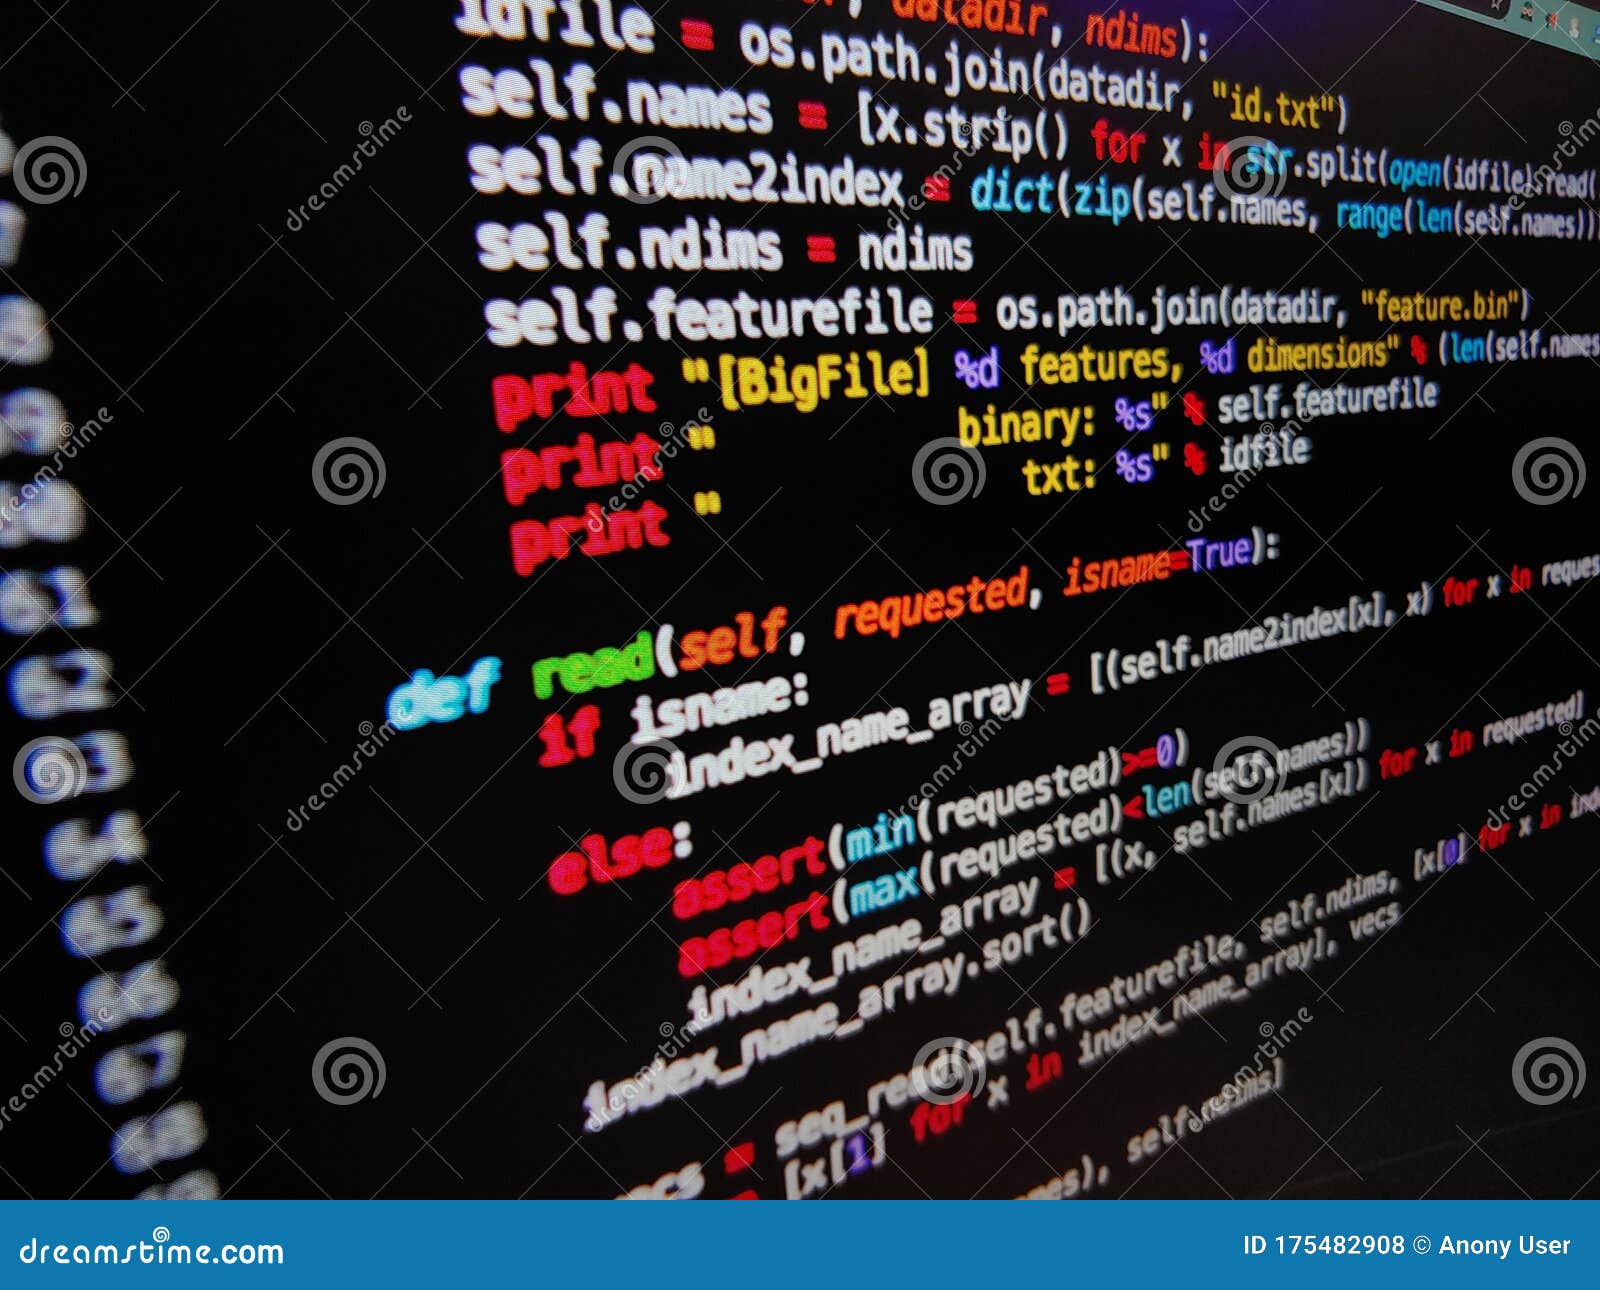 Awesome Background Wallpaper Of Computer Pc Hacking Codes Scripting Hacks Security Hacker Language Code Script Wallpapers Stock Photo Image Of Scripting Hacking 175482908